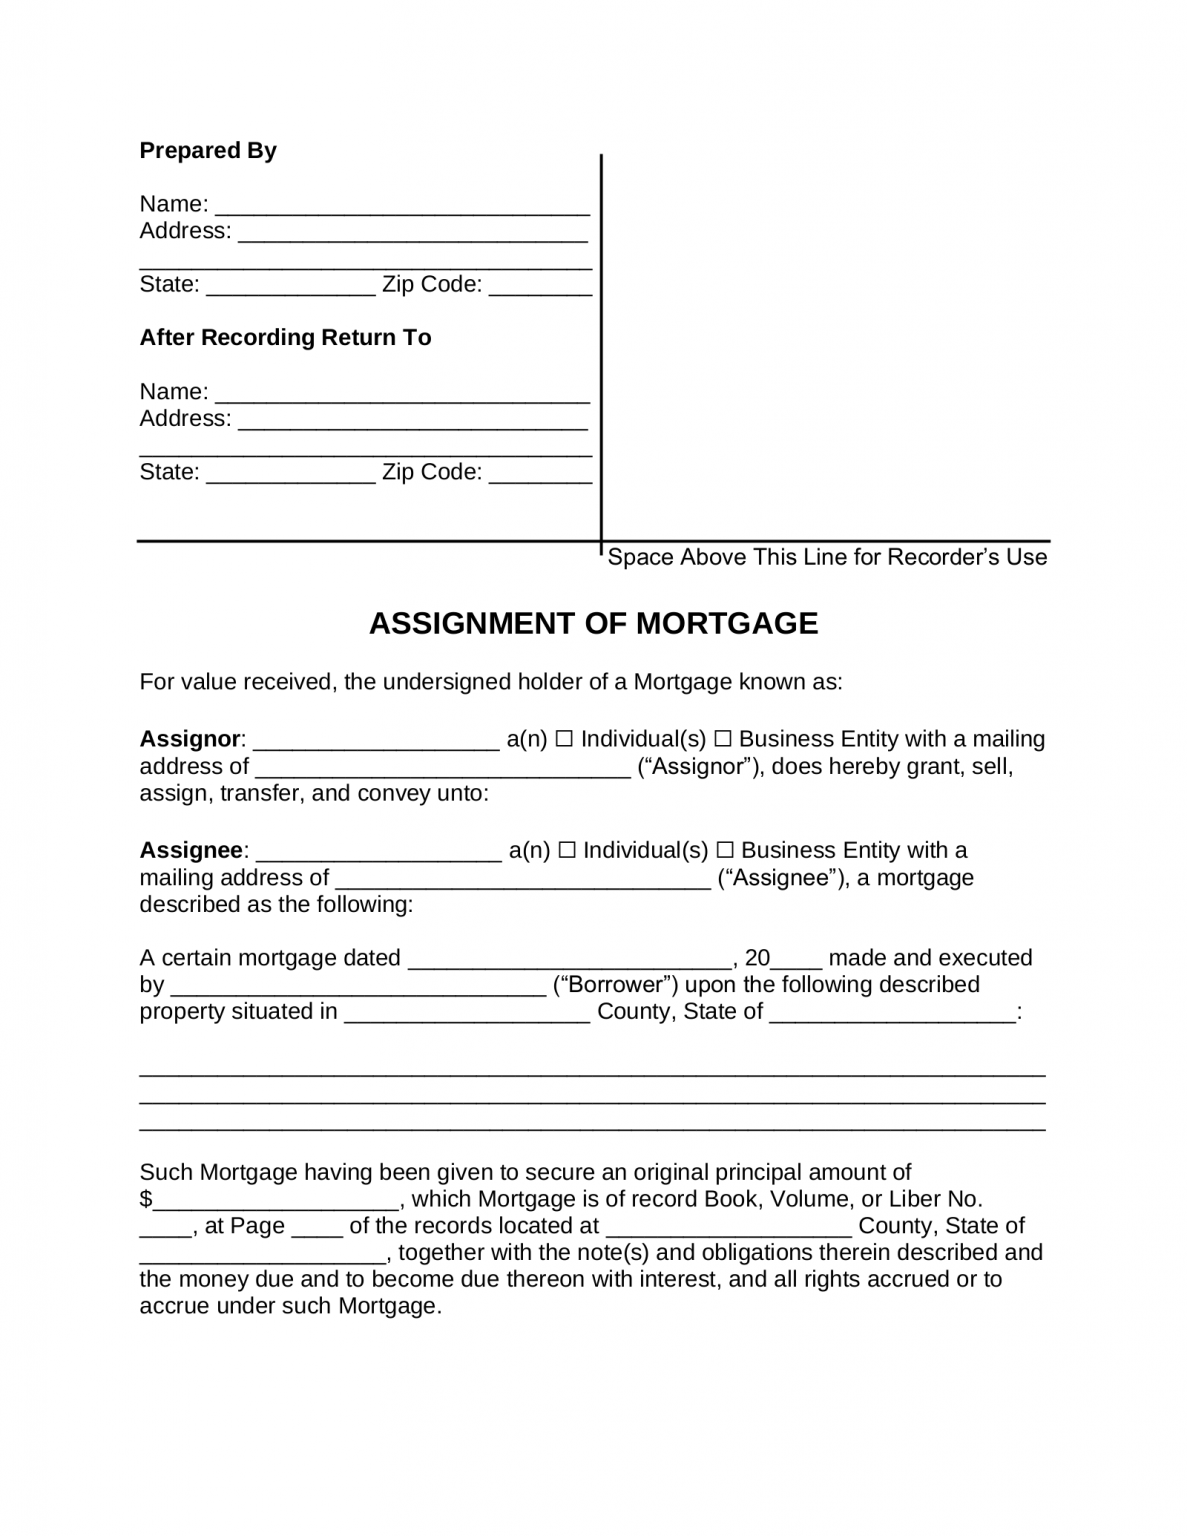 assignment of mortgage new york